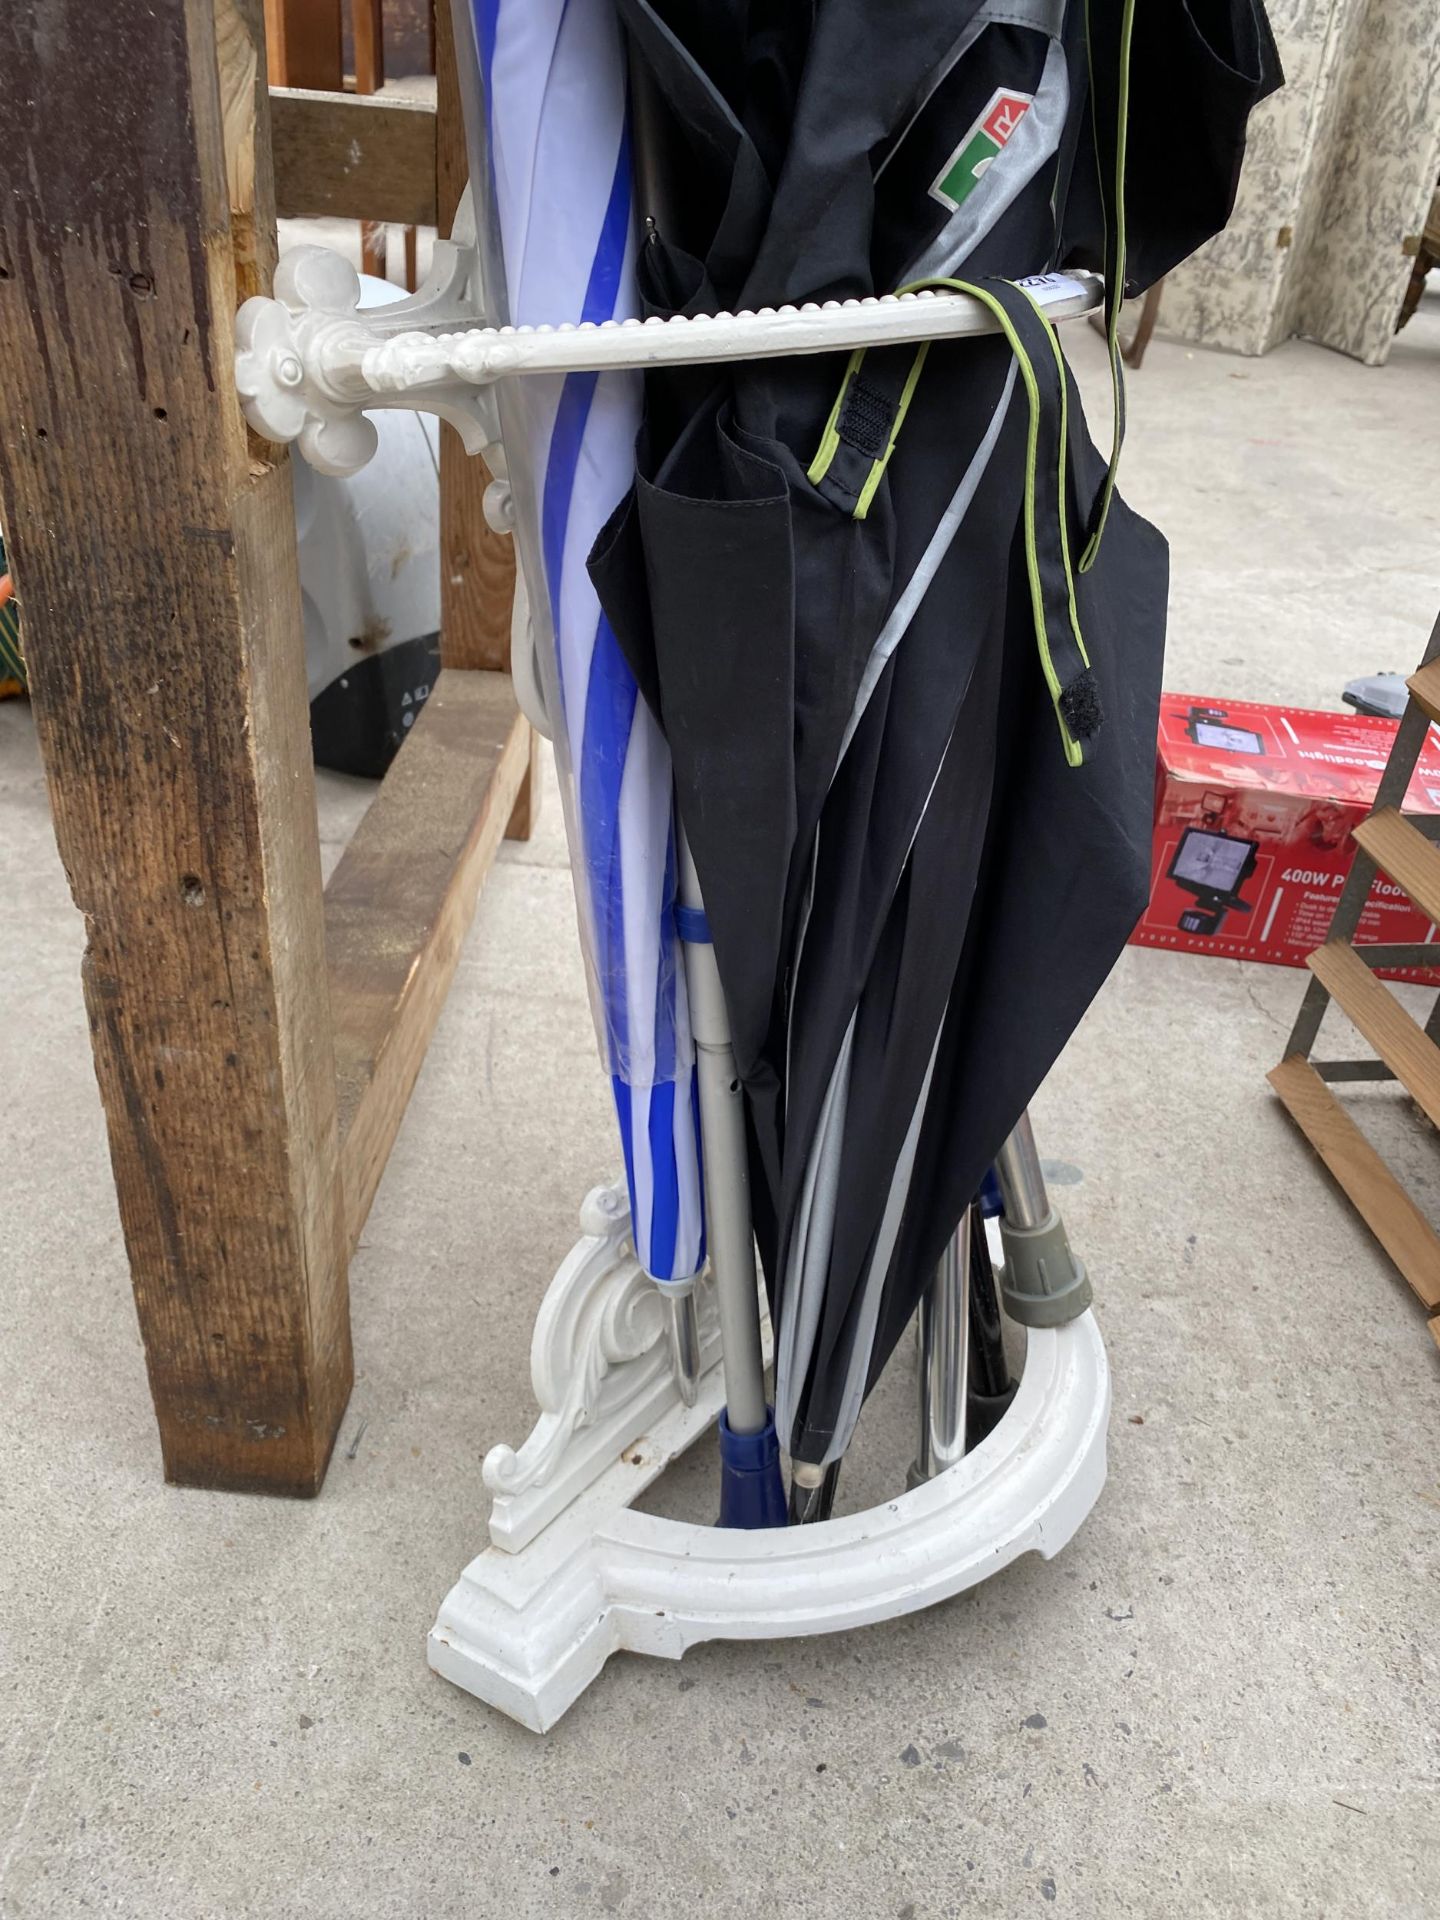 A DECORATIVE CAST METAL STICK STAND COMPLETE WITH VARIOUS WALKING AIDS AND UMBRELLAS - Bild 2 aus 2